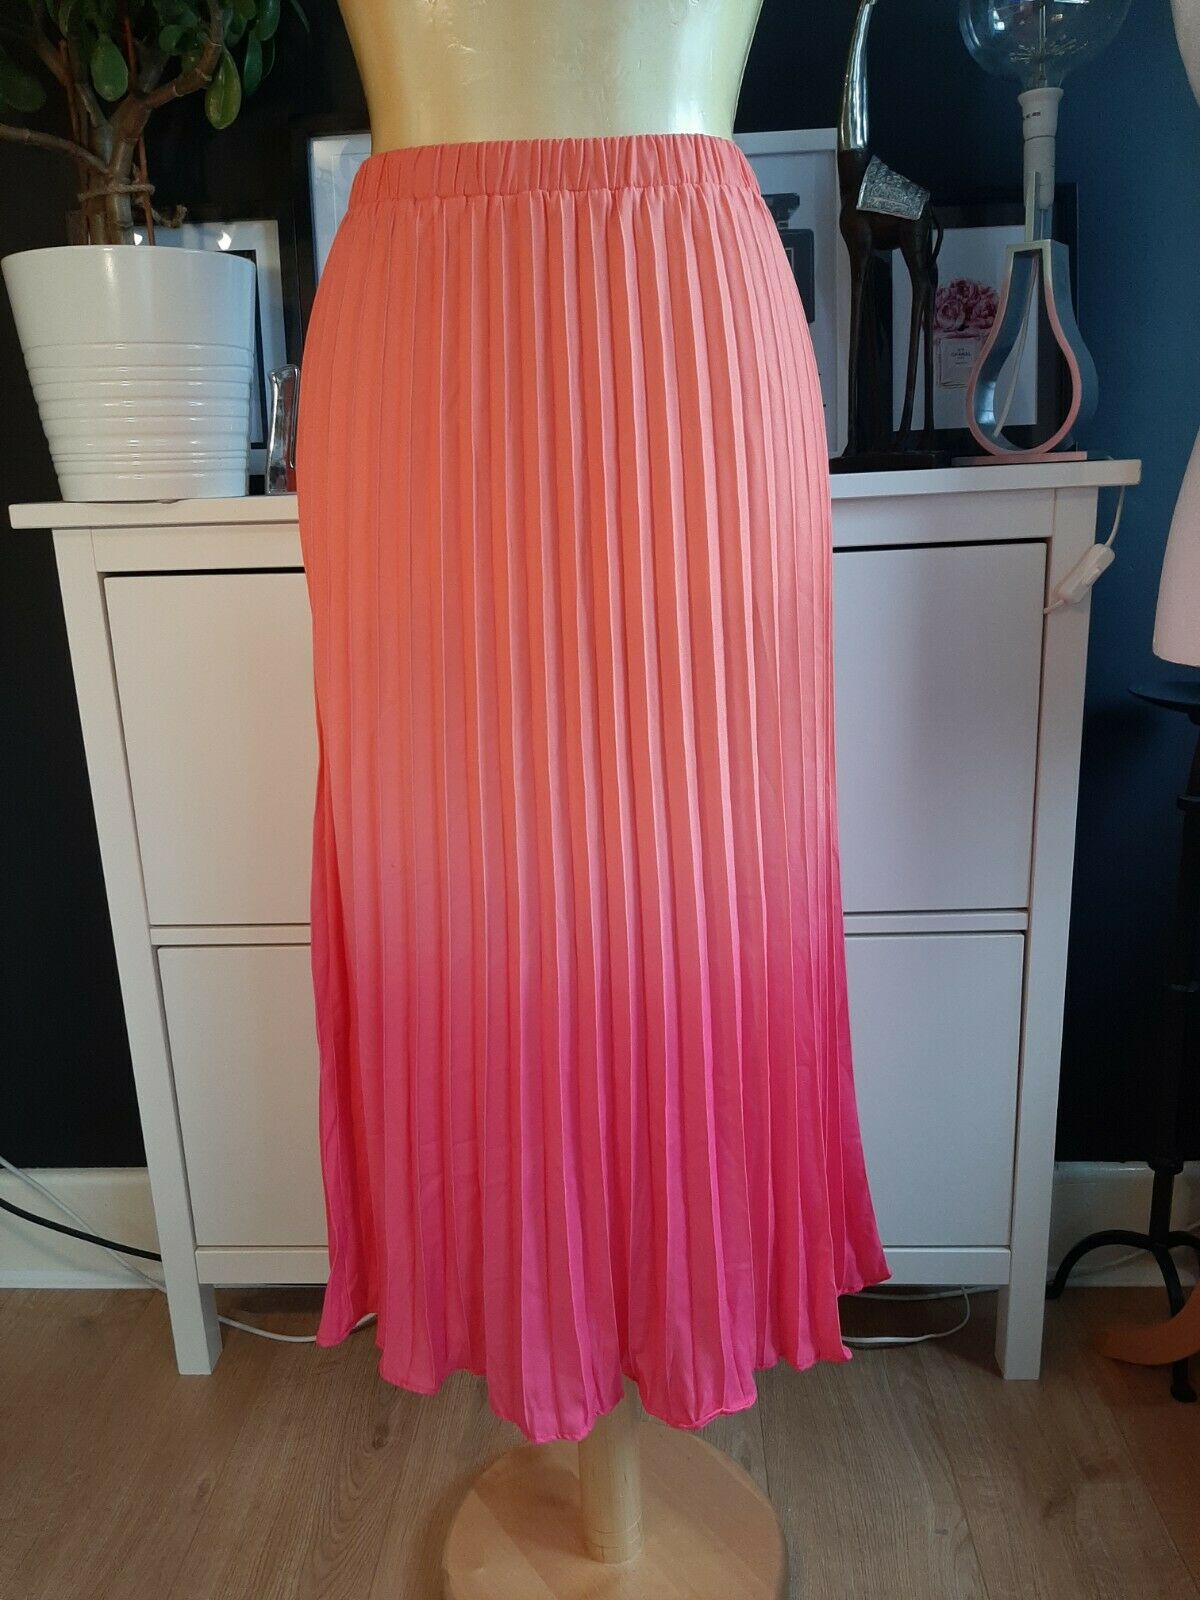 Pink/Orange Pleated Skirt Oliver Bonas Size 6 (fit 8-10 as well)